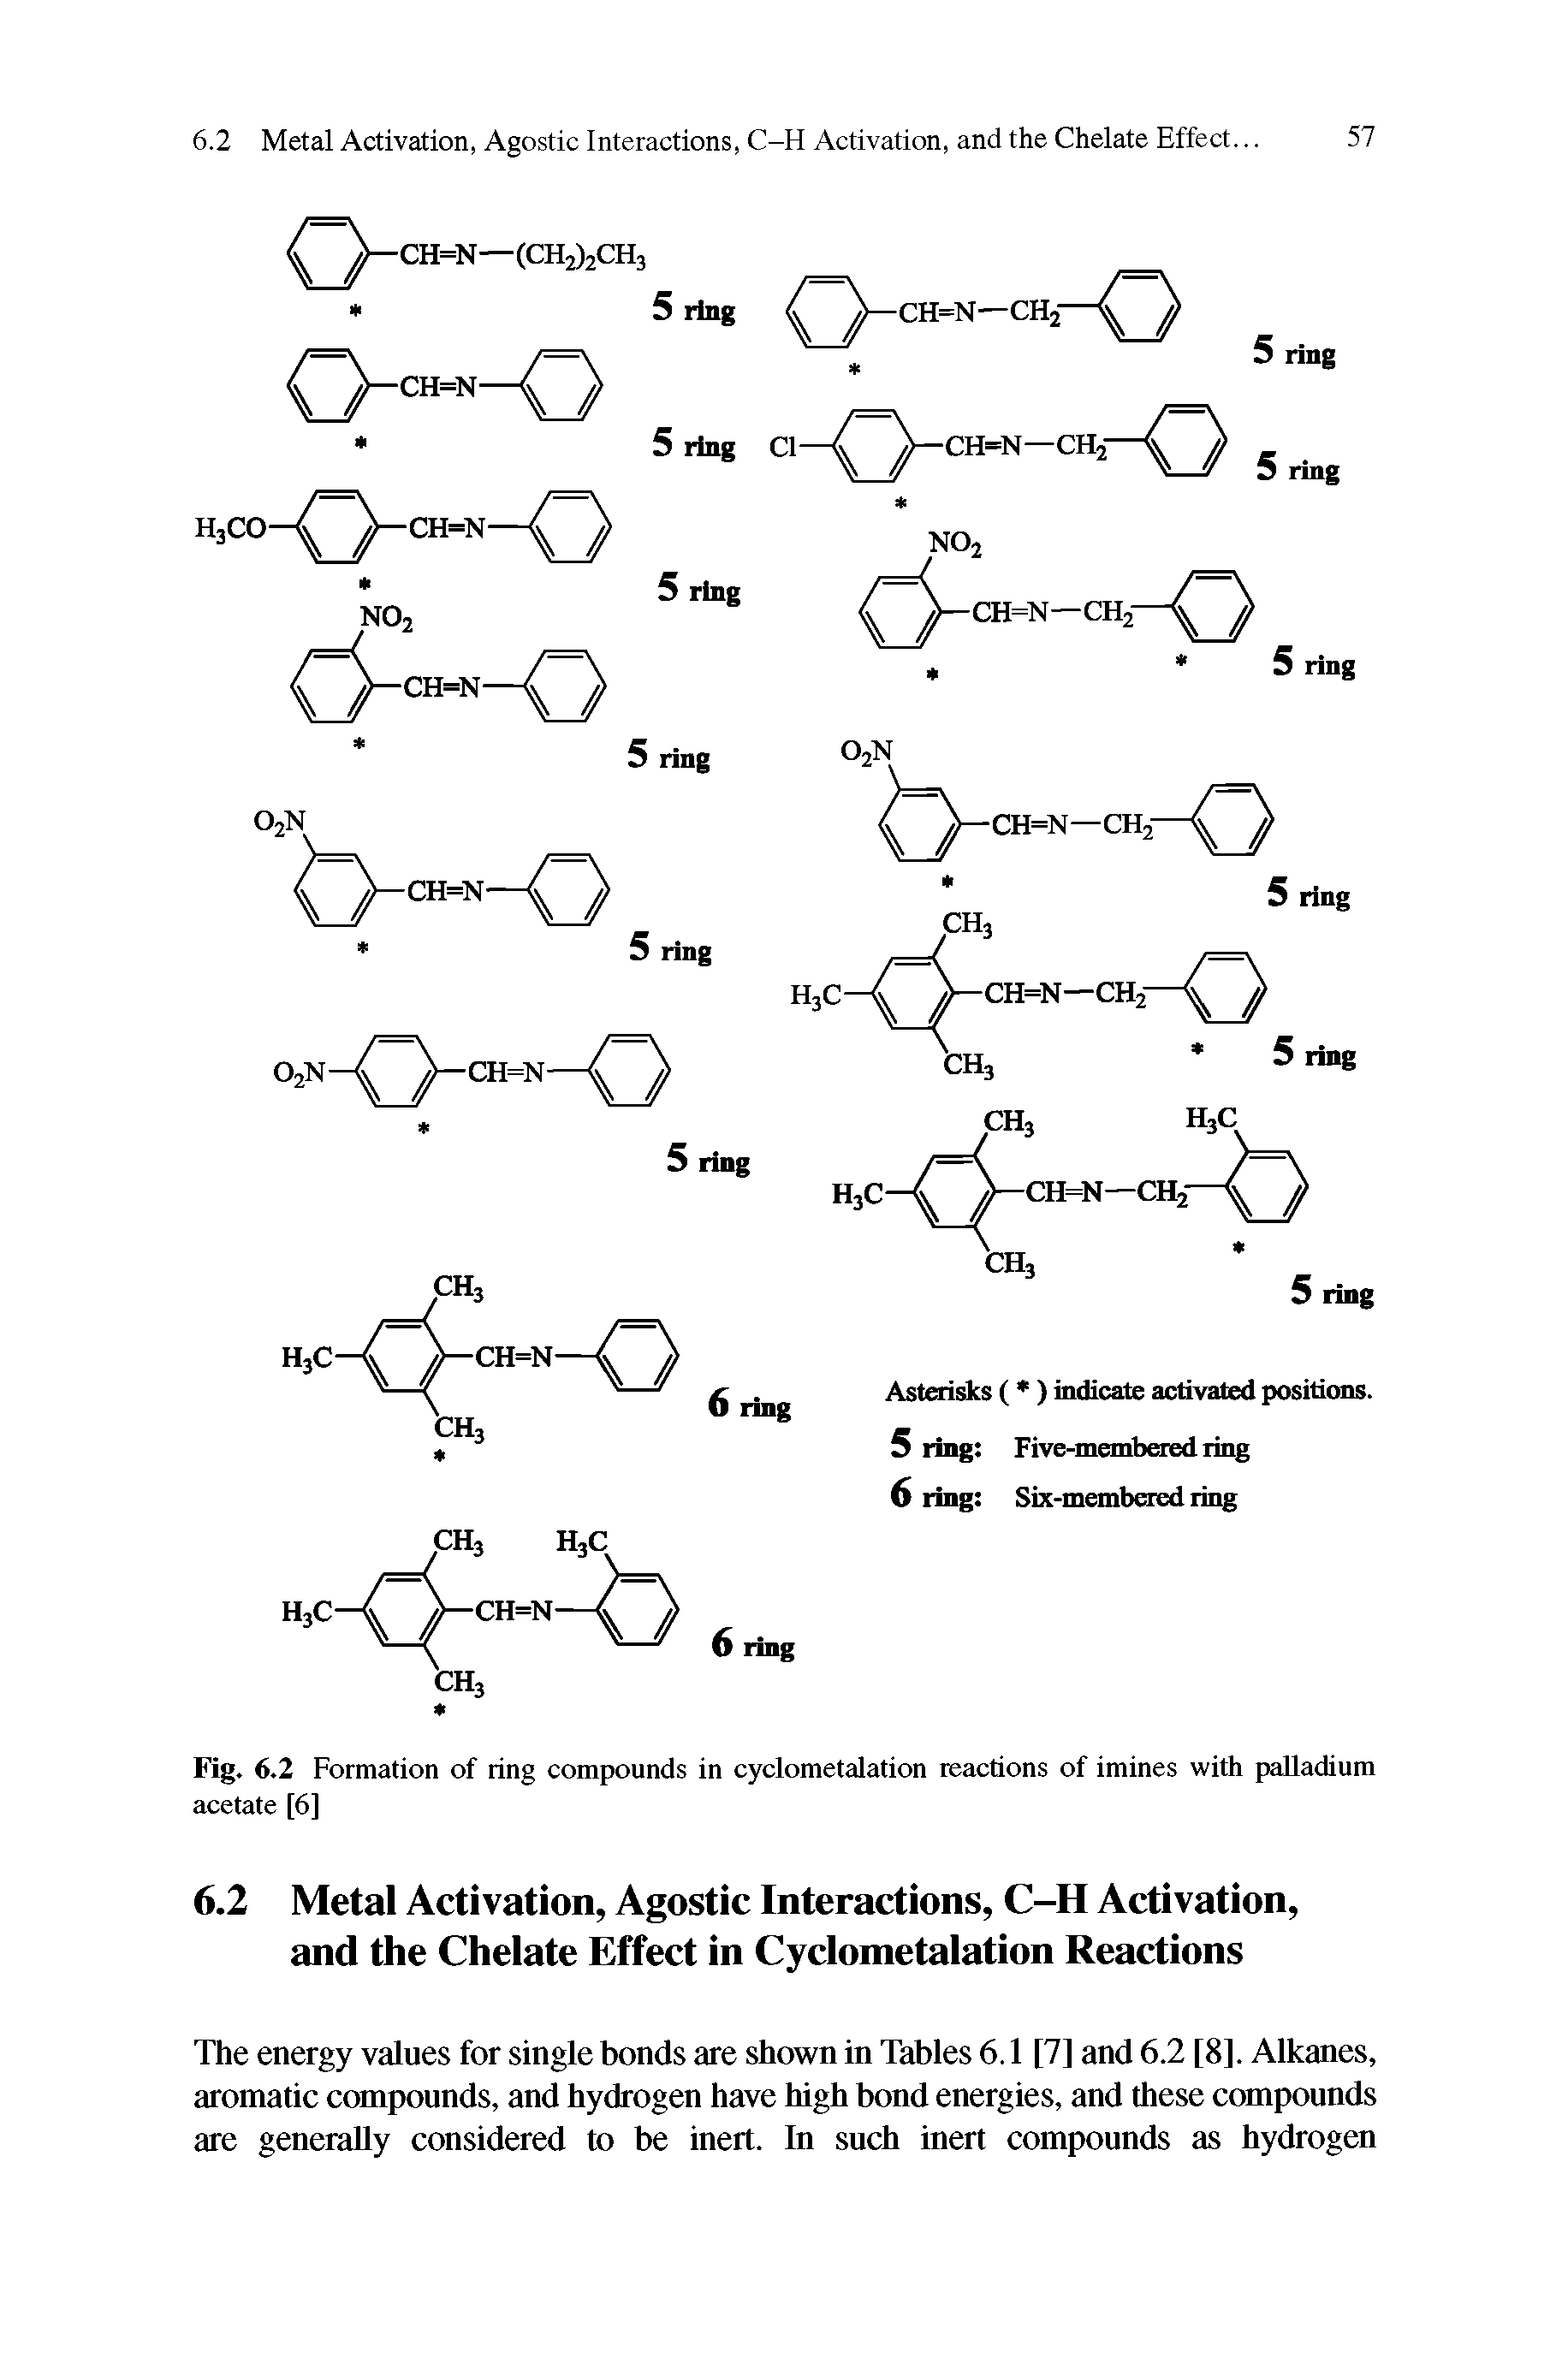 Fig. 6.2 Formation of ring compounds in cyclometalation reactions of imines with palladium acetate [6]...